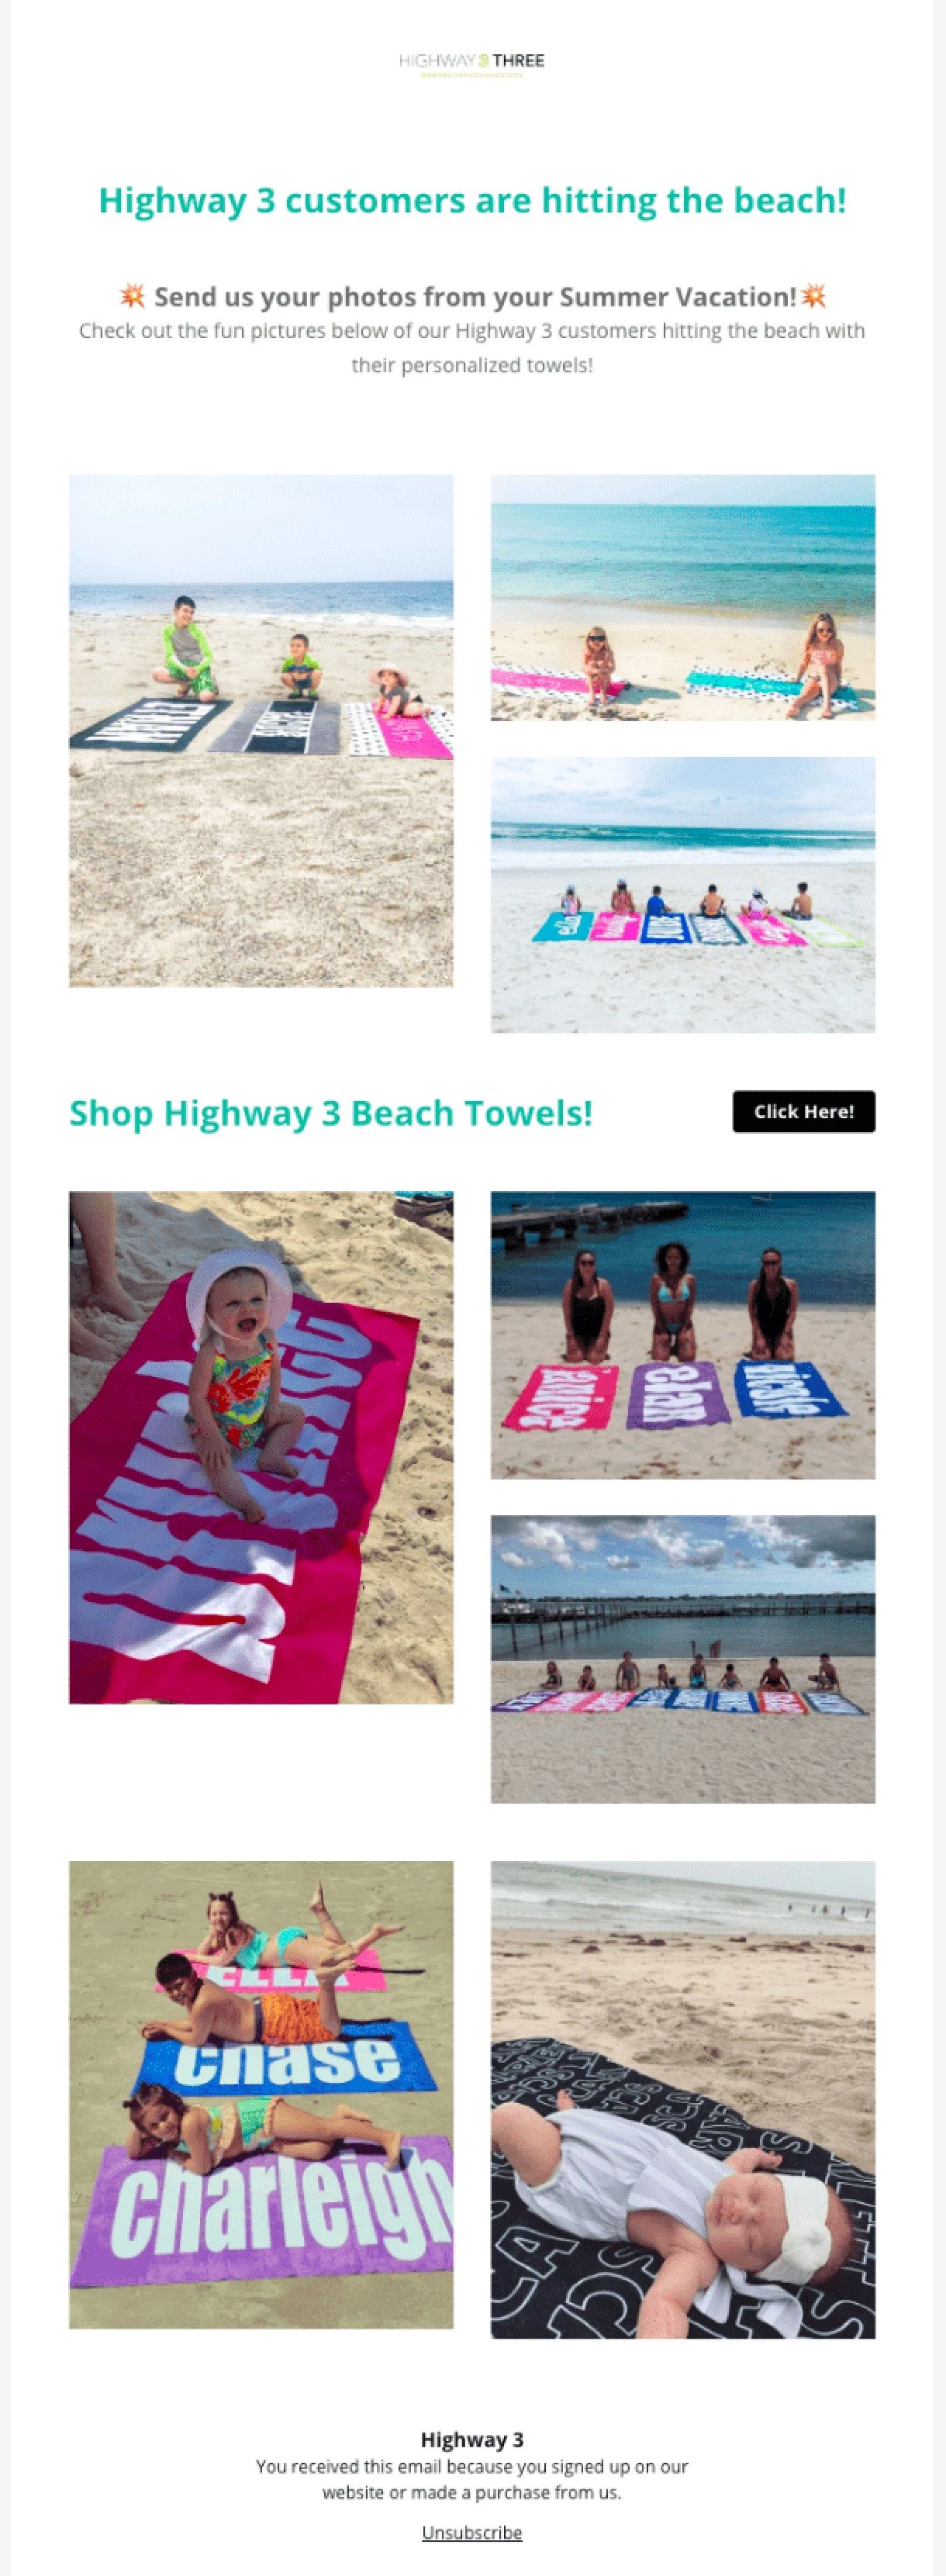 Highway 3 ecommerce newsletter with user generated content photos